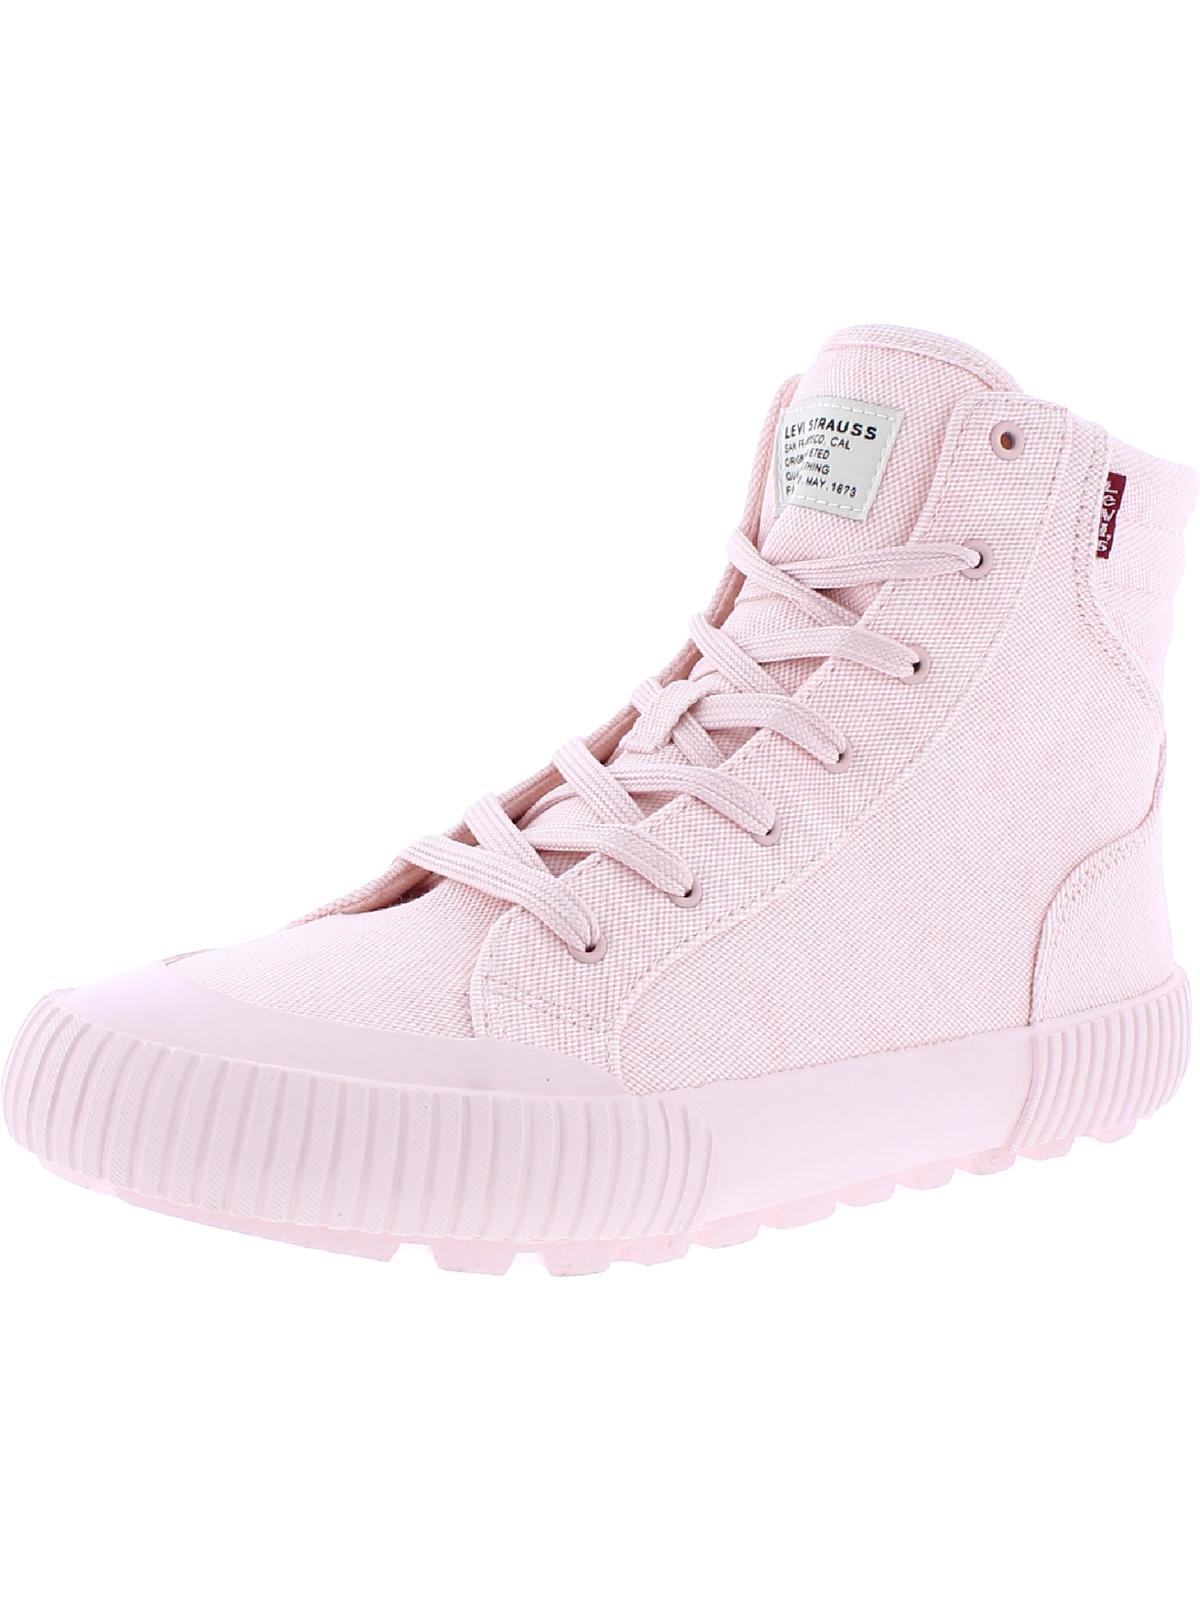 Levi's Olivia Df Faux Leather Lifestyle Casual And Fashion Sneakers in Pink  | Lyst